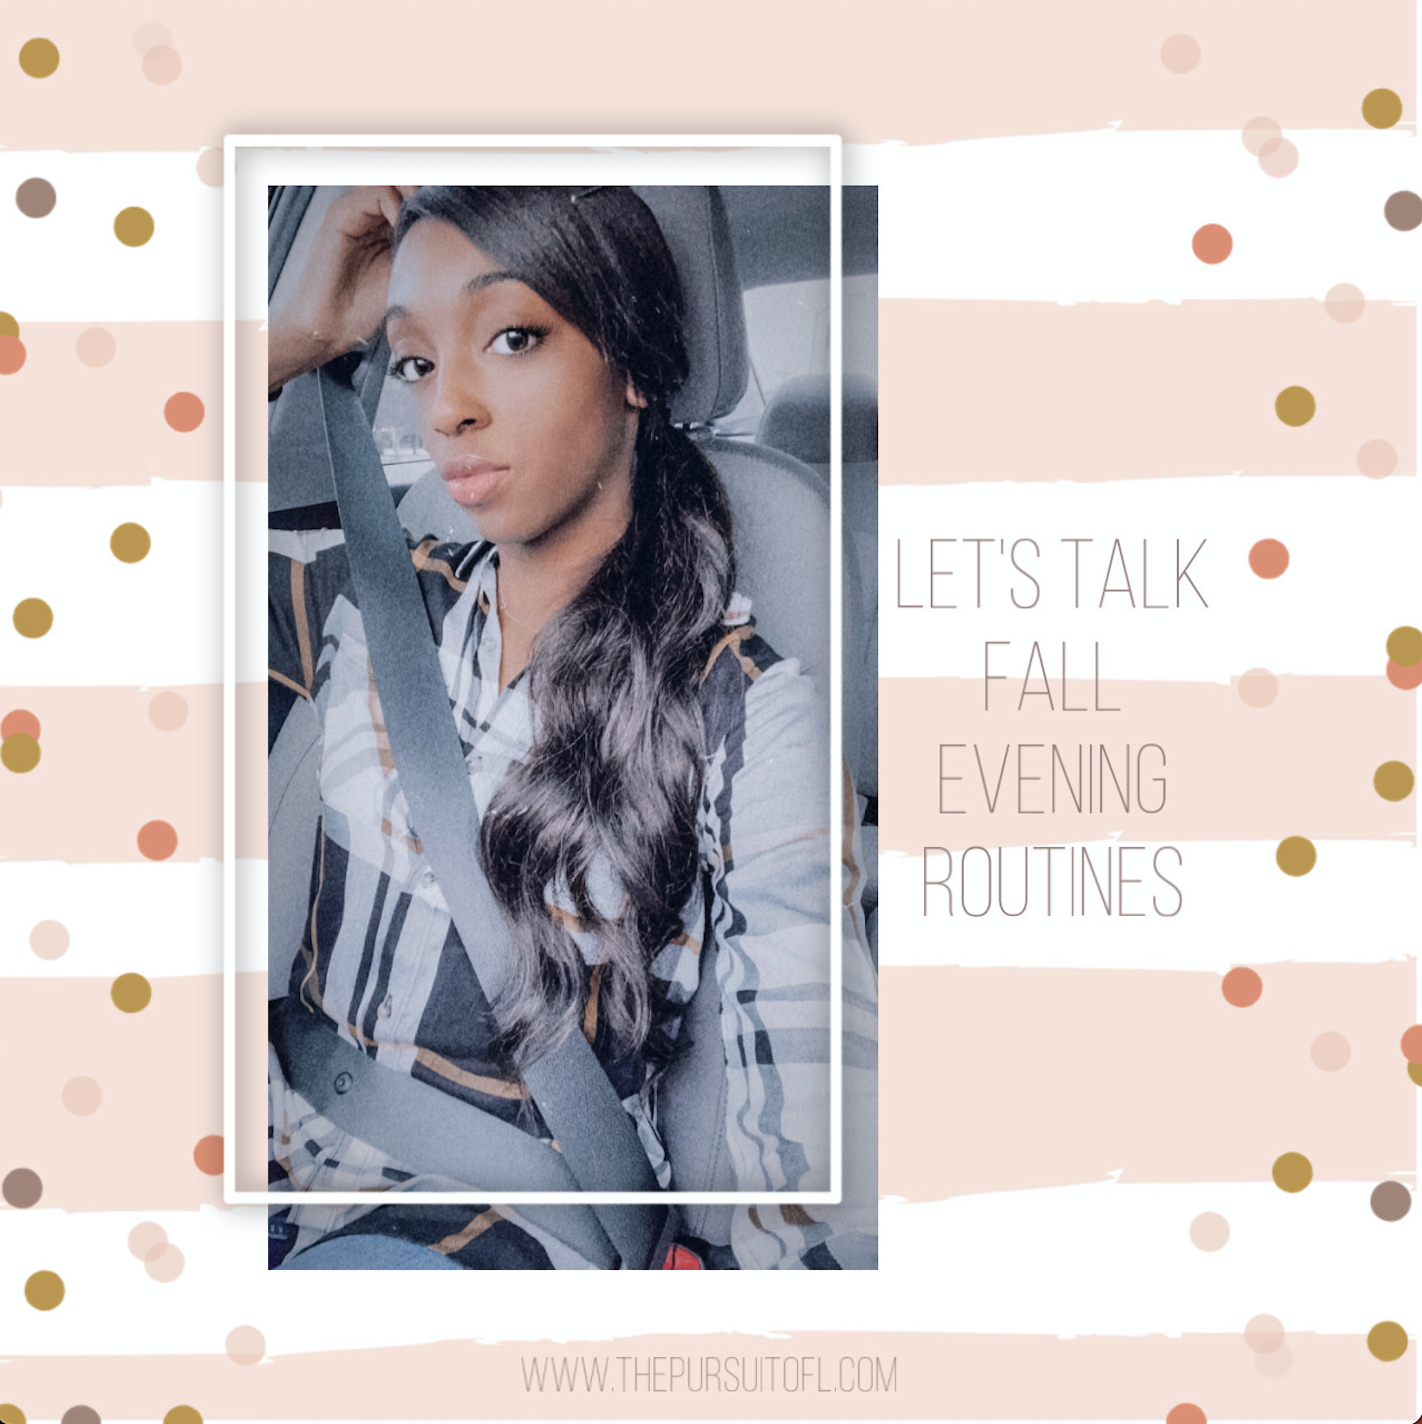 Let's Talk Fall Evening Routines